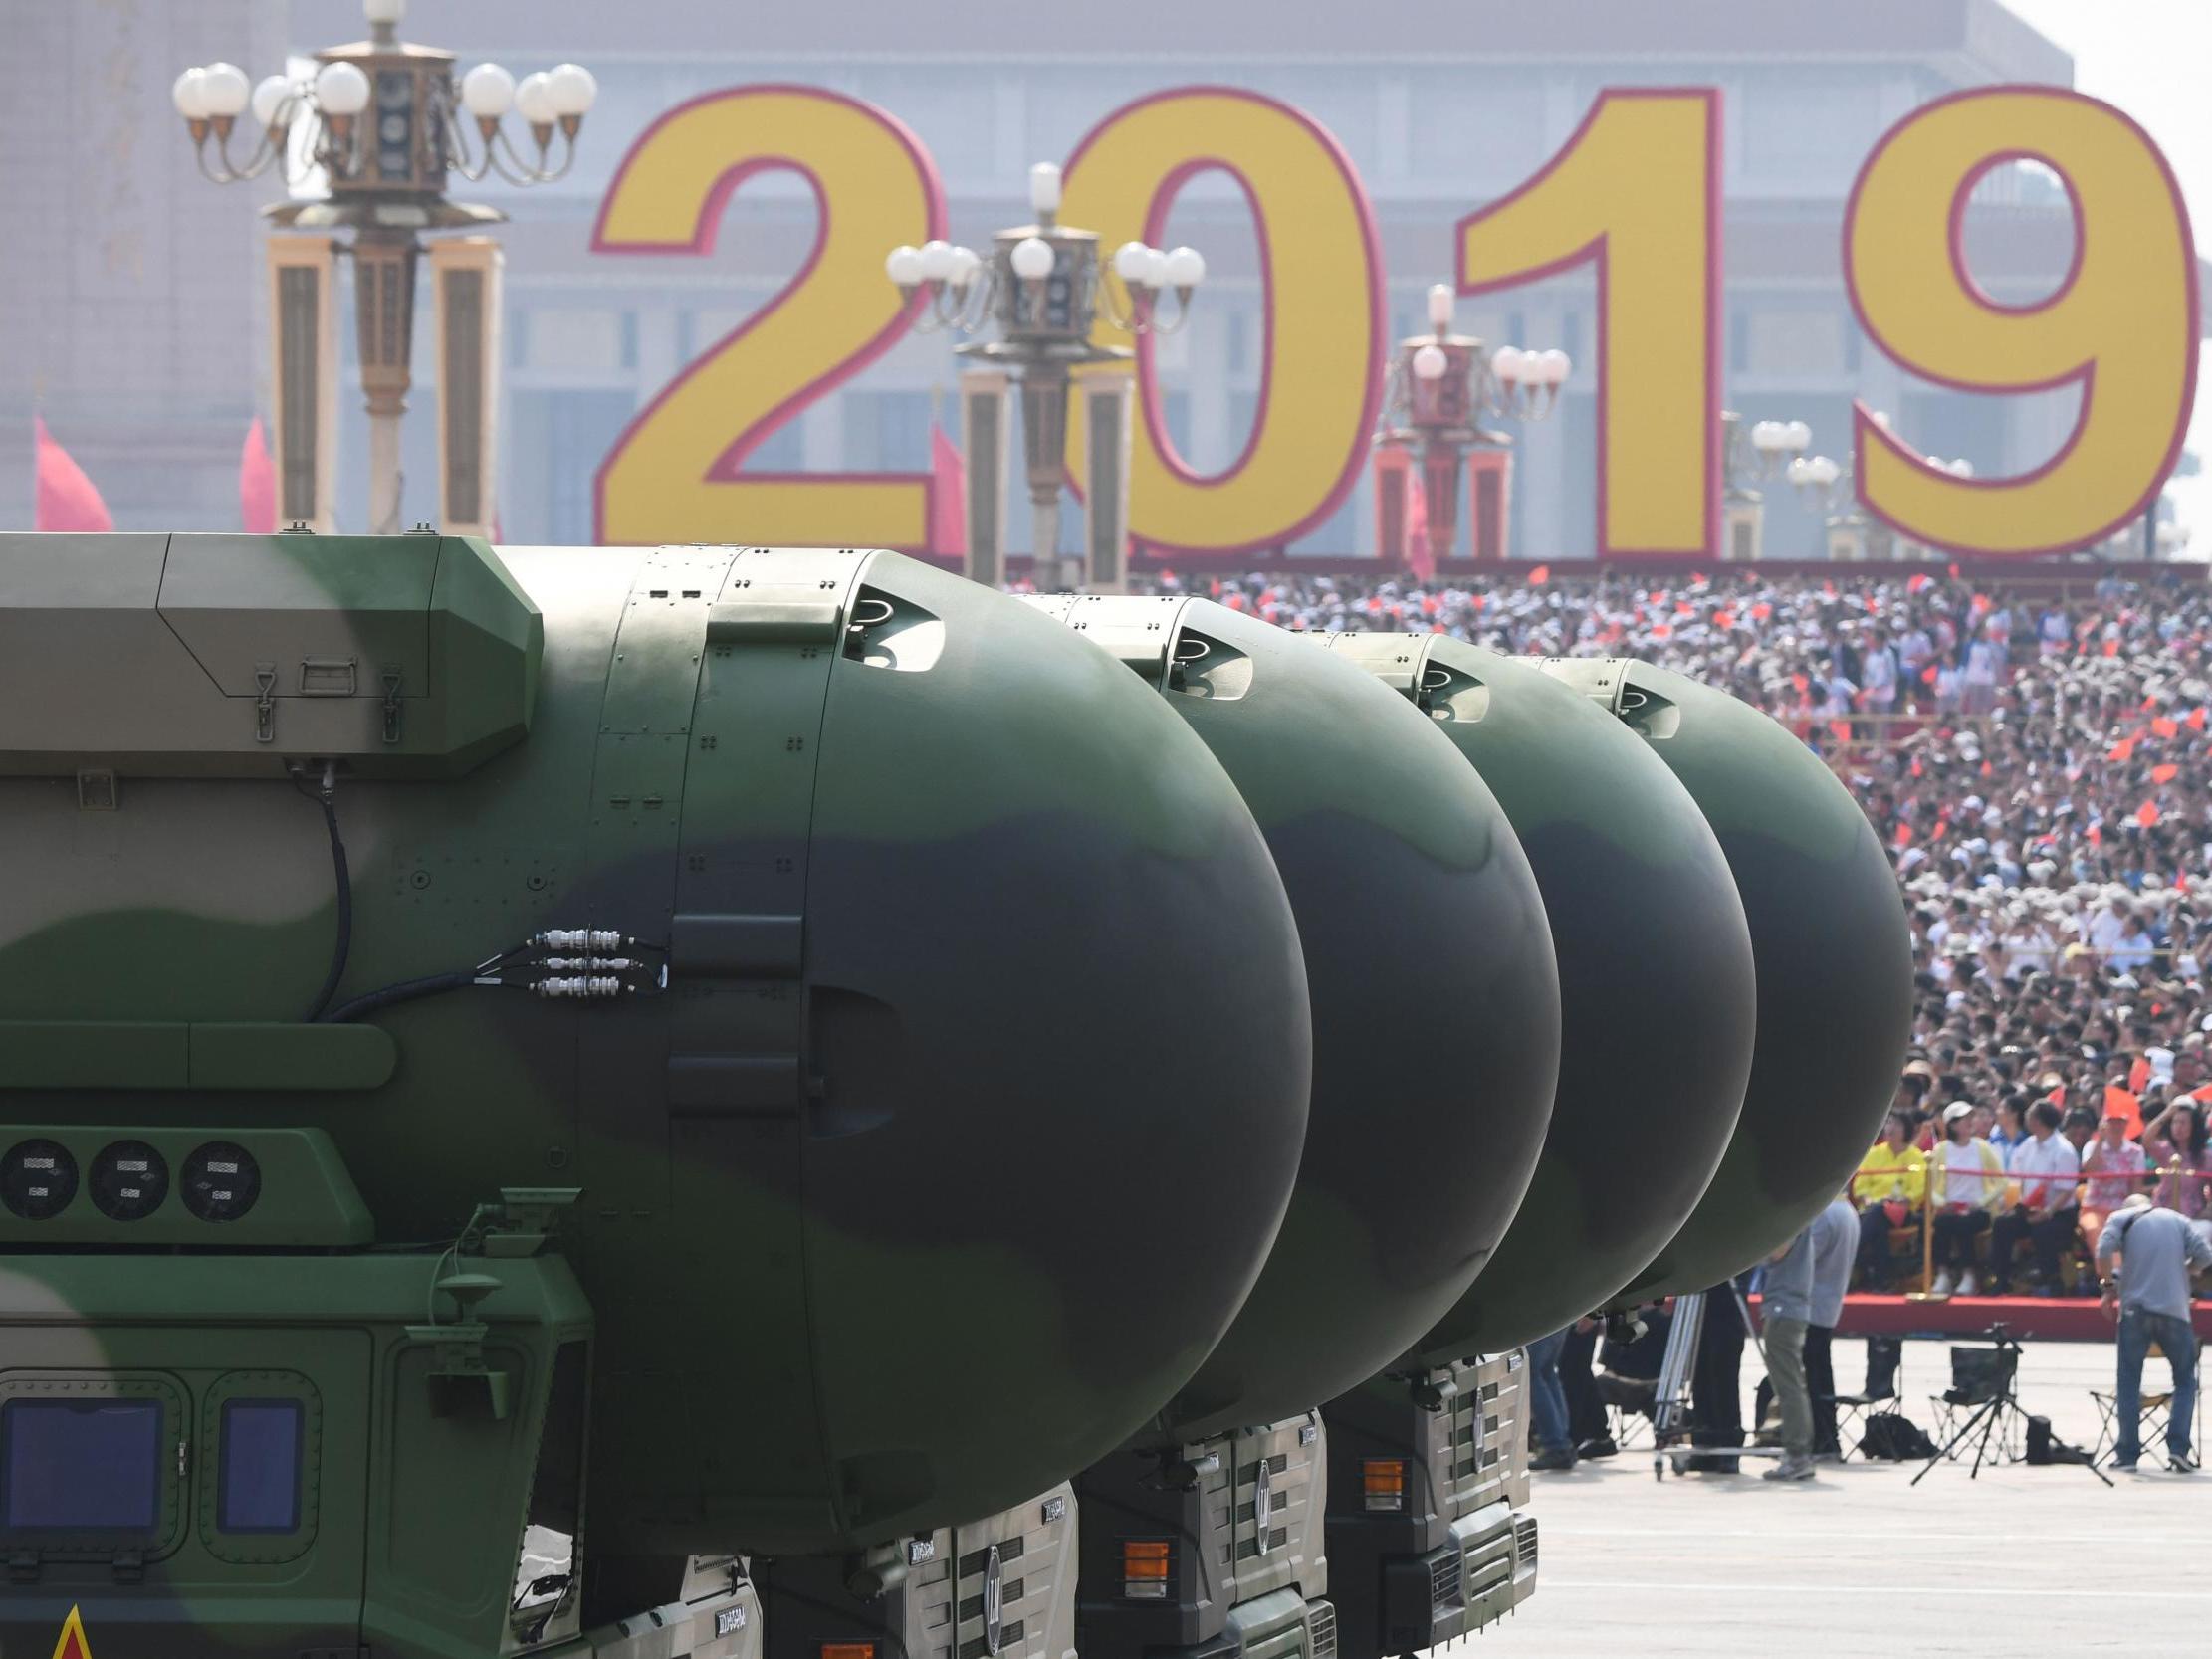 China’s DF-41 nuclear-capable intercontinental ballistic missiles are seen during a military parade at Tiananmen Square in October 2019